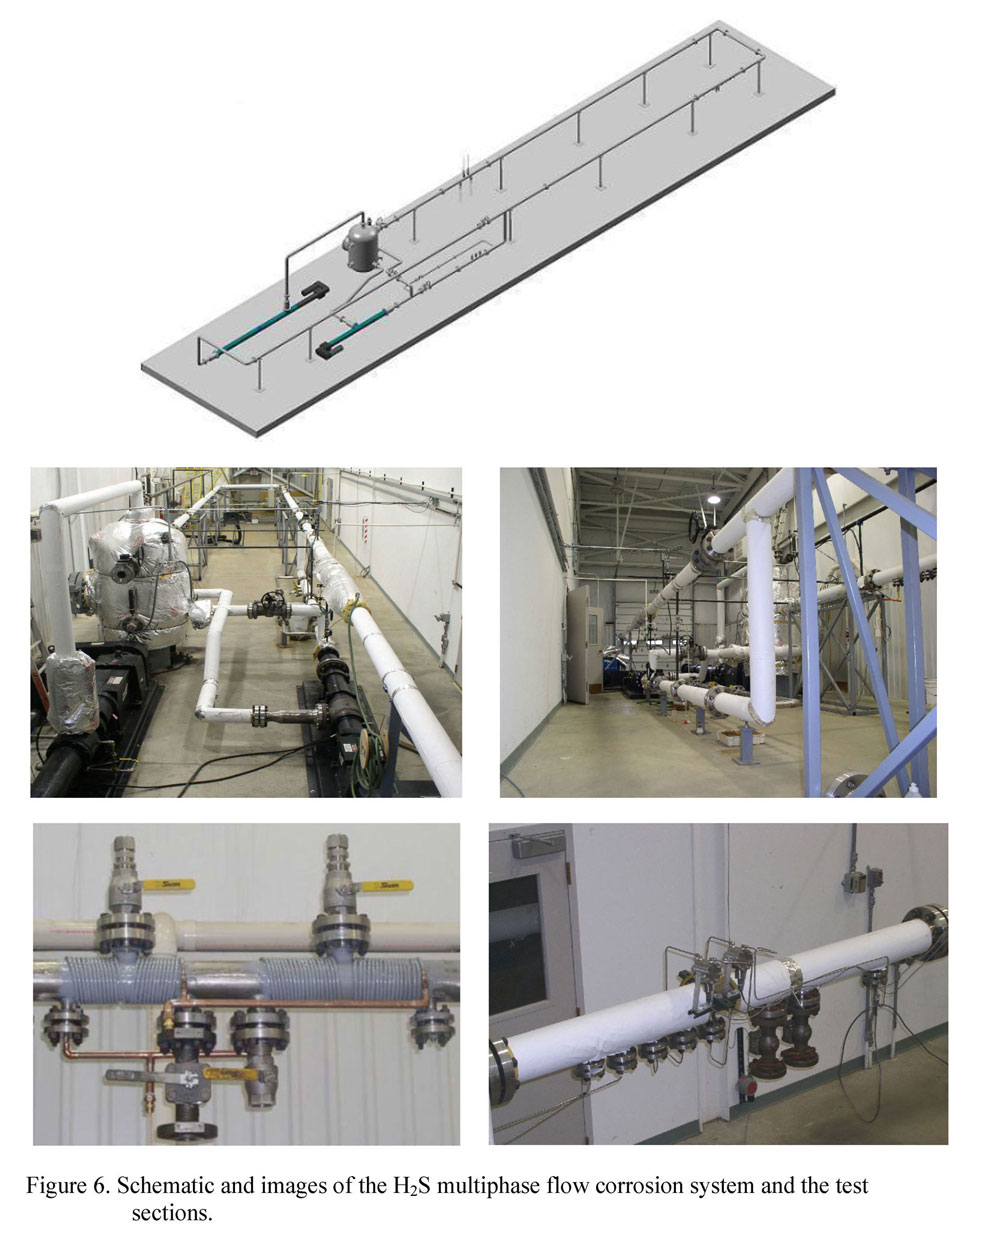 Schematic and images of the H2S multiphase flow corrosion system and the test sections